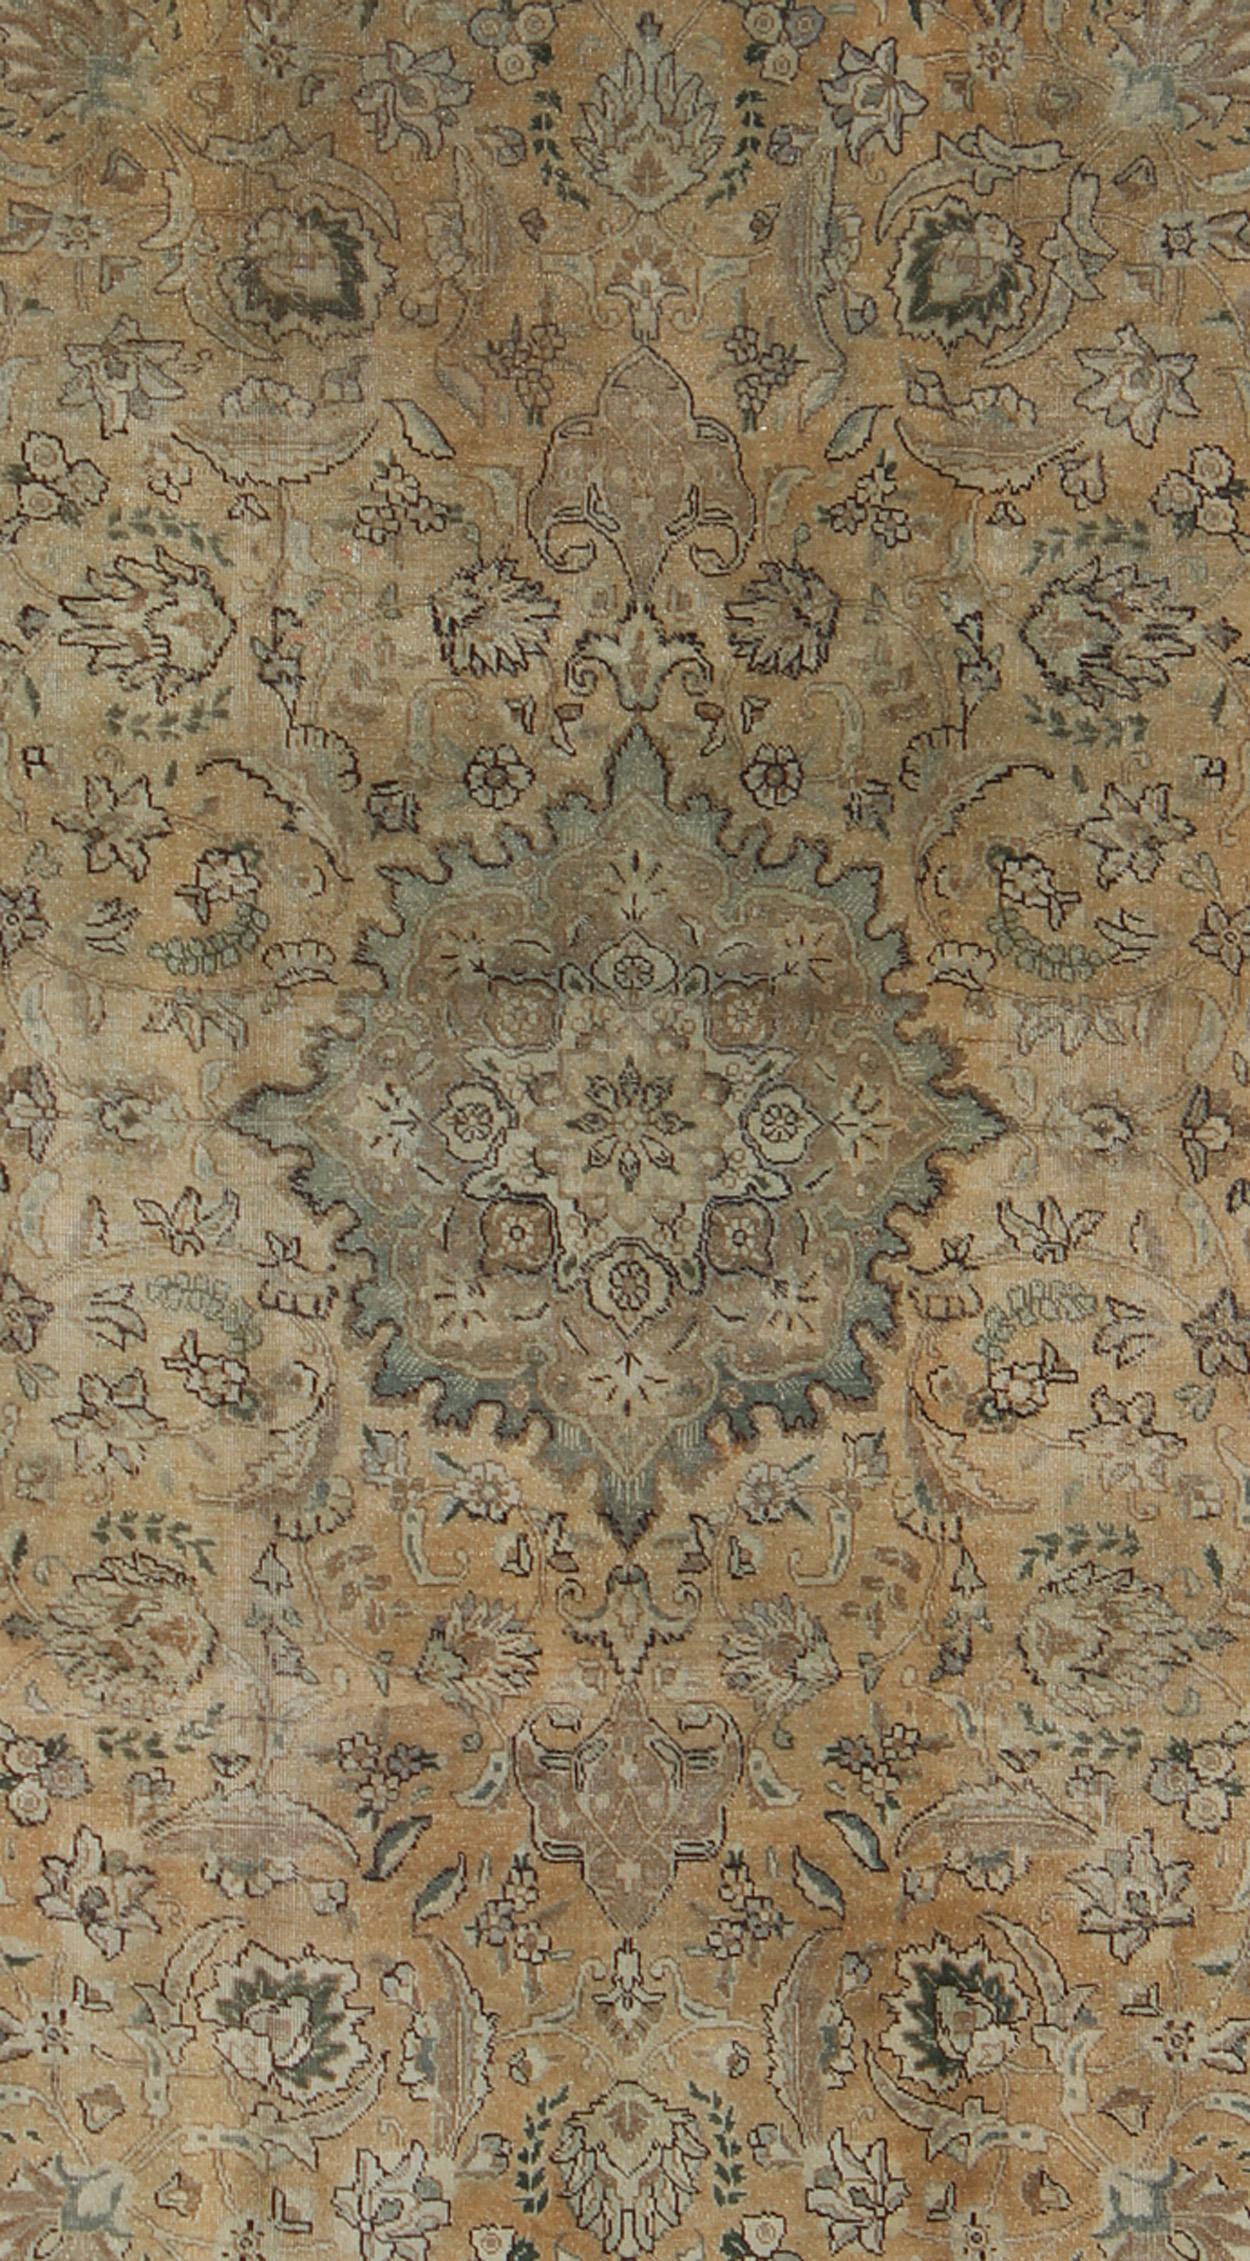 Shades of Tan, Taupe, Cream and Vintage Persian Tabriz Rug with Medallion Design In Good Condition For Sale In Atlanta, GA